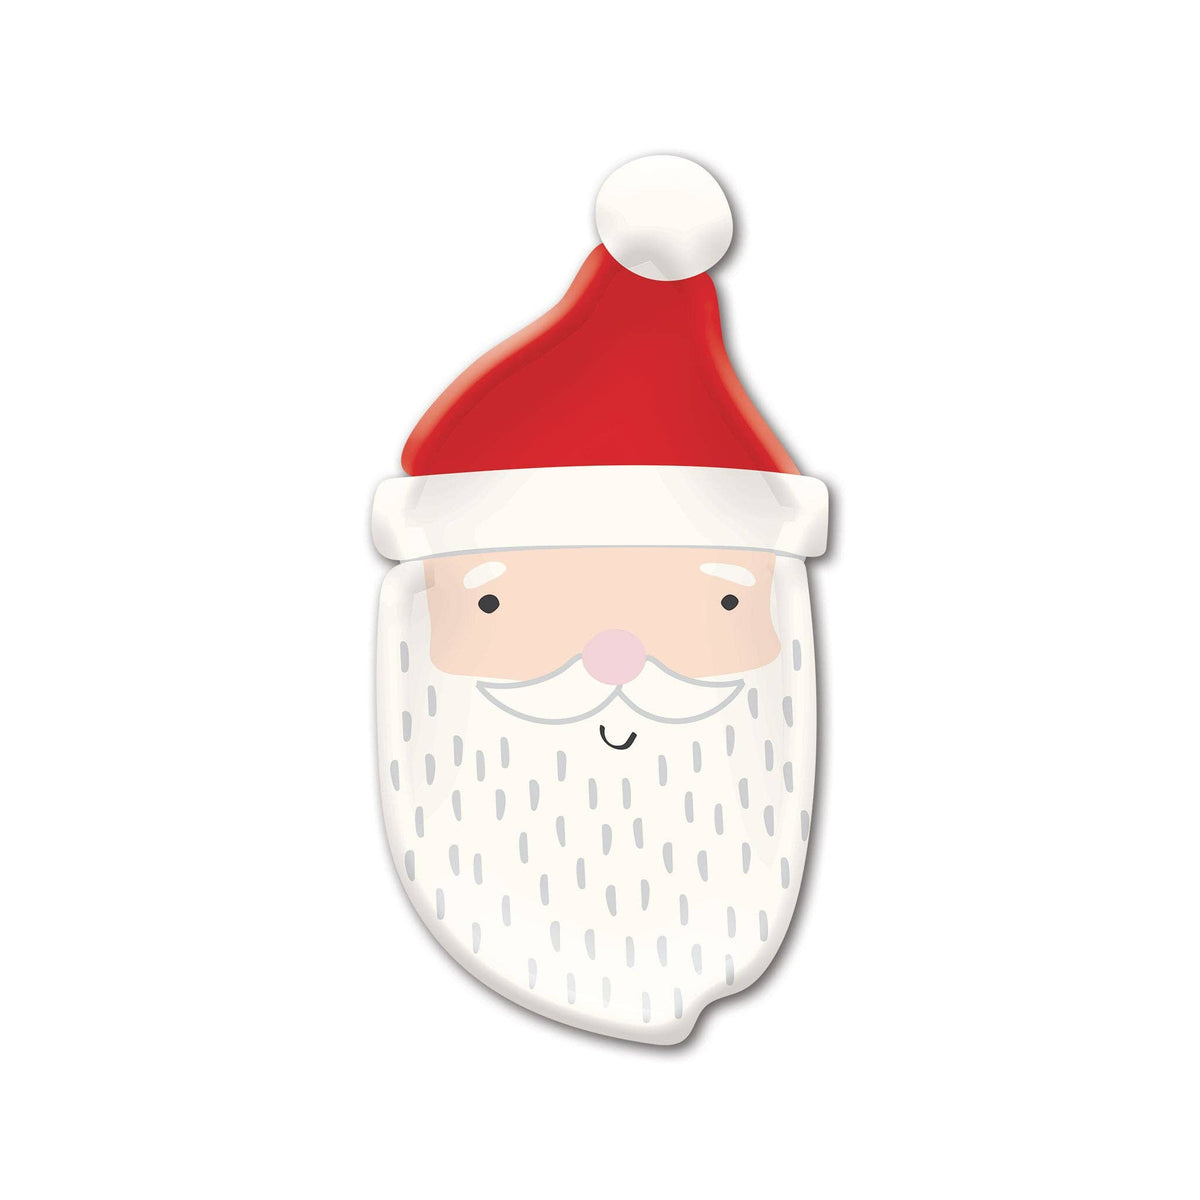 Whimsy Santa Shaped Paper Plate